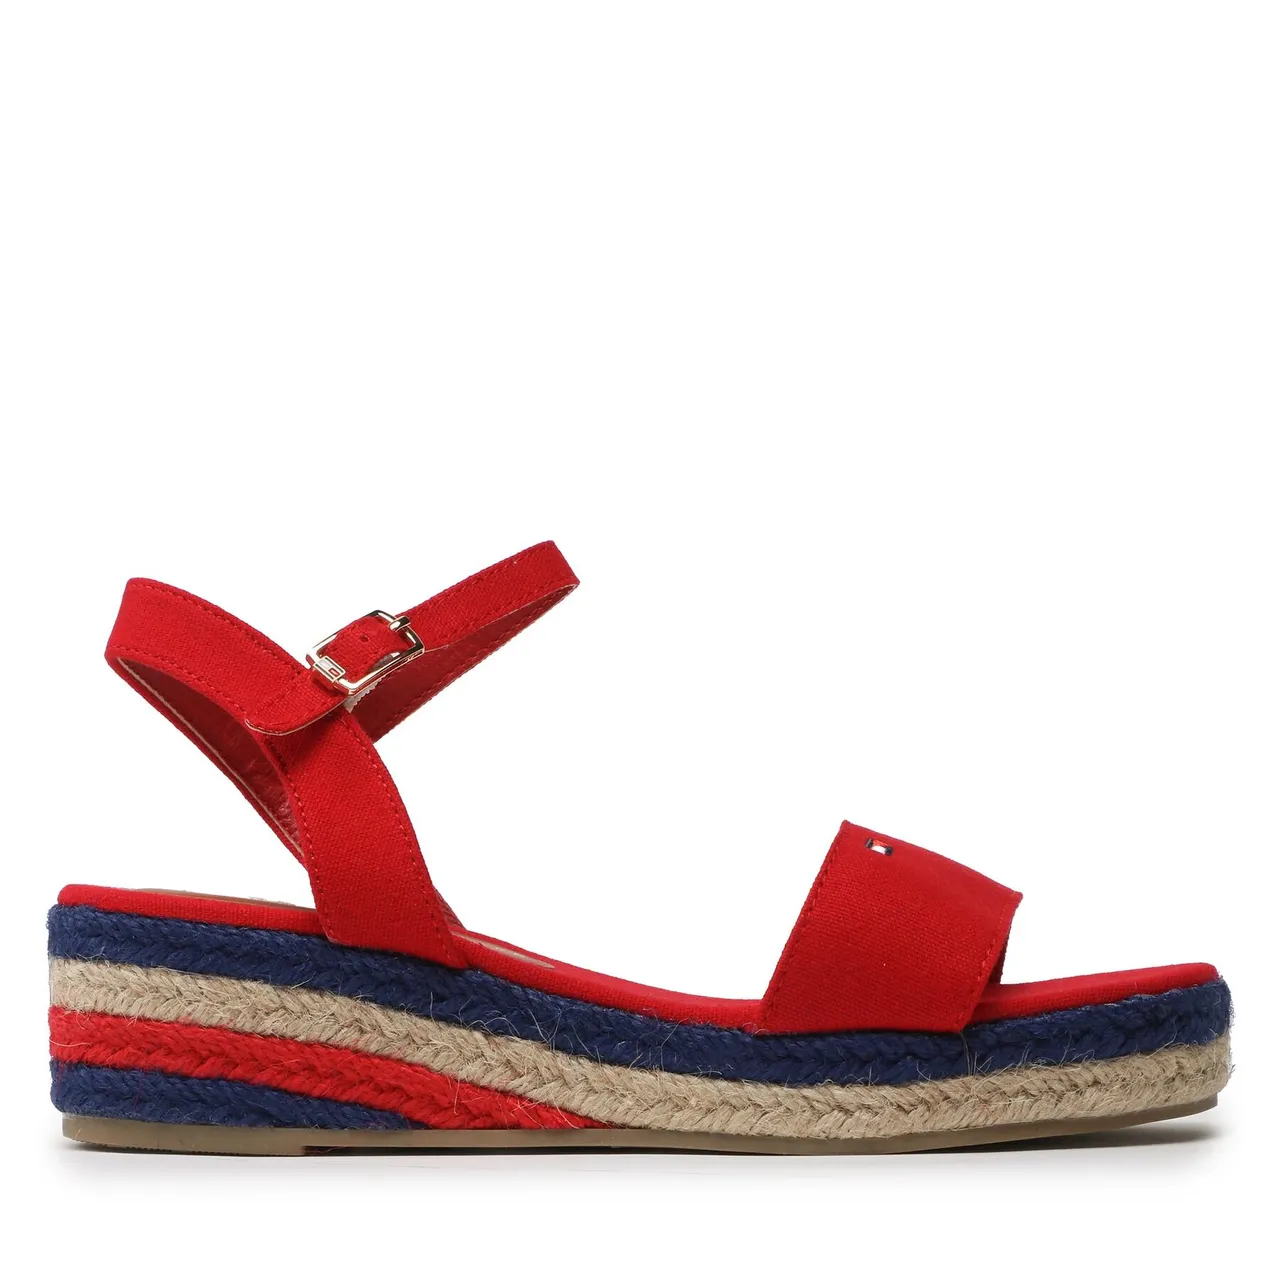 Espadrilles Tommy Hilfiger Rope Wedge T3A7-32778-0048300 S Red 300